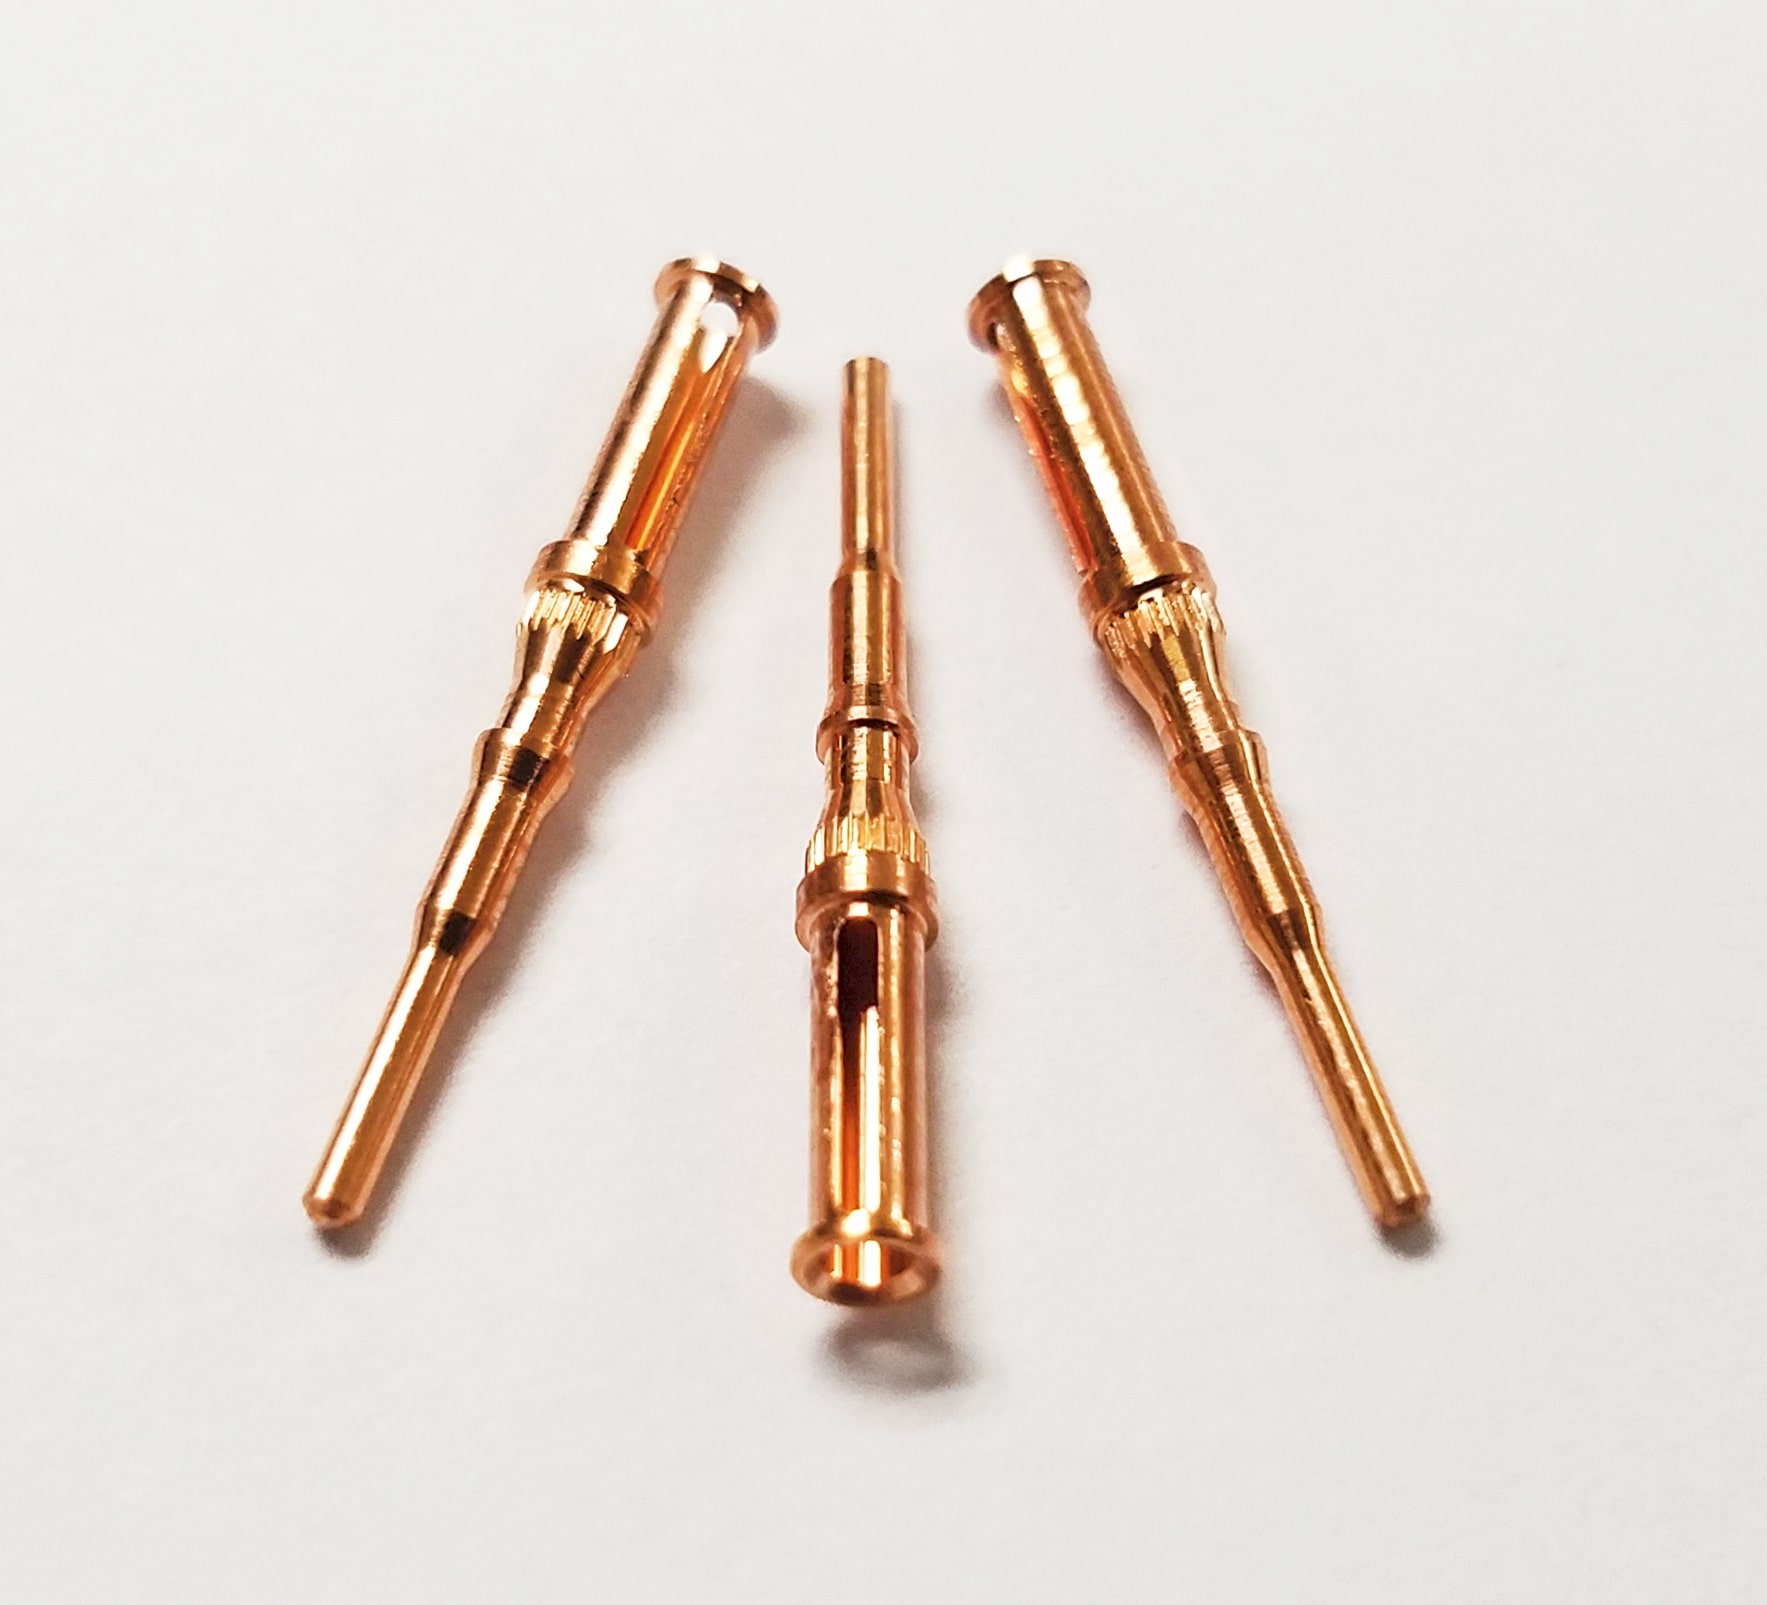 Precision CNC Machined Copper Electrical Pin Products